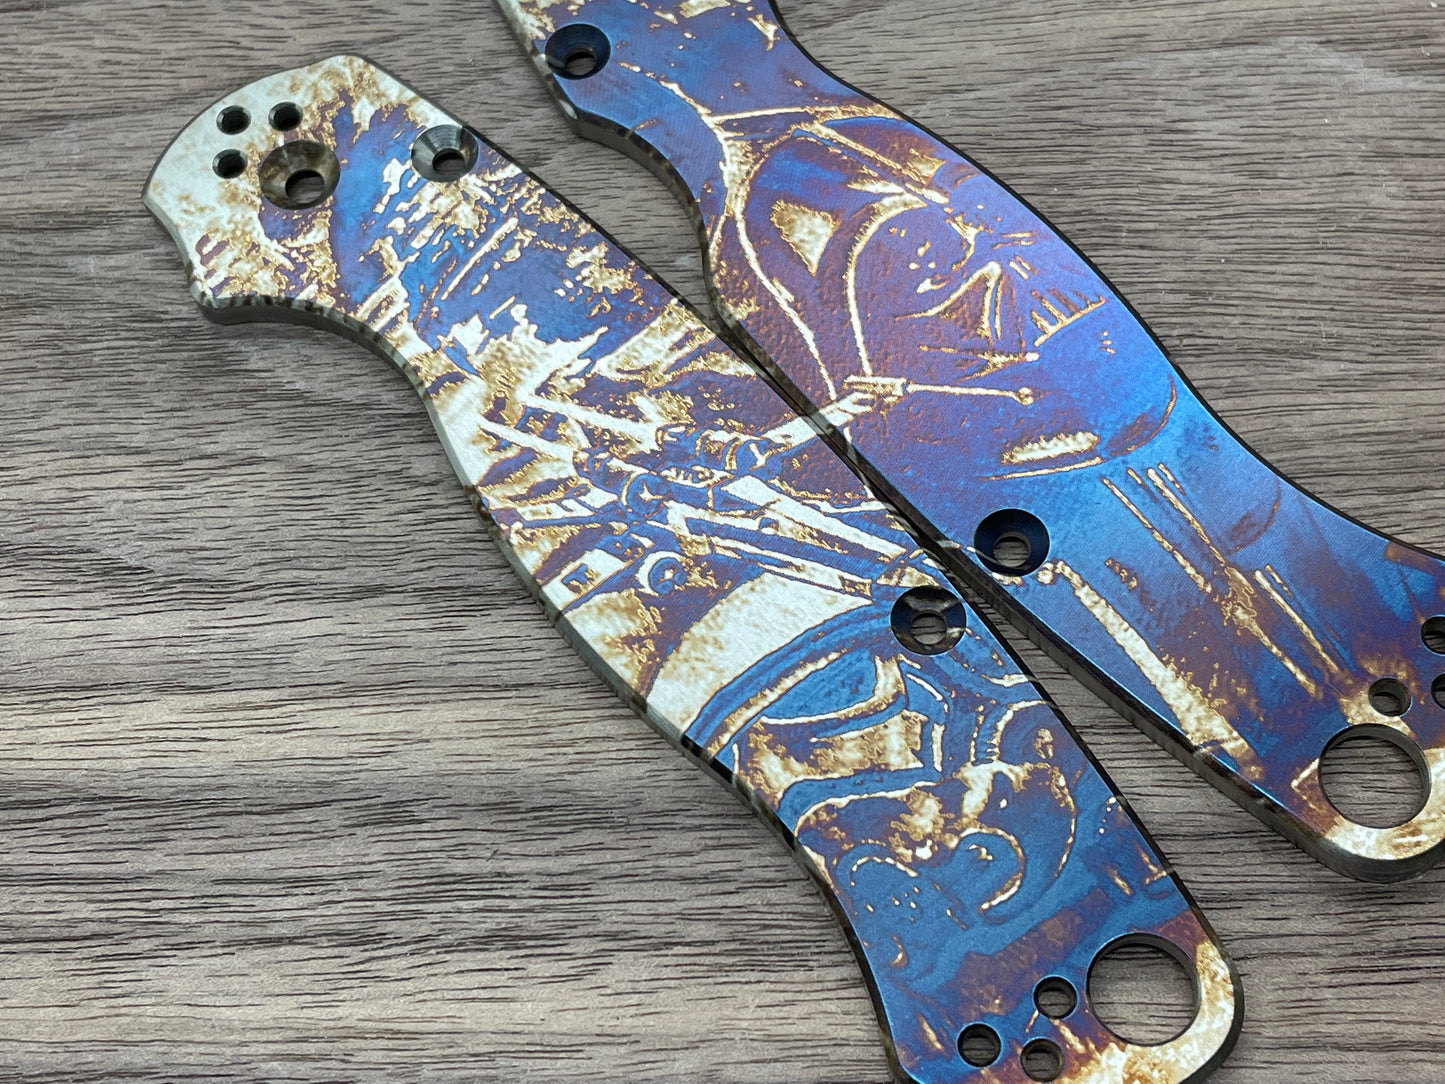 STAR WARS heat ano engraved Titanium scales for Spyderco Paramilitary 2 PM2